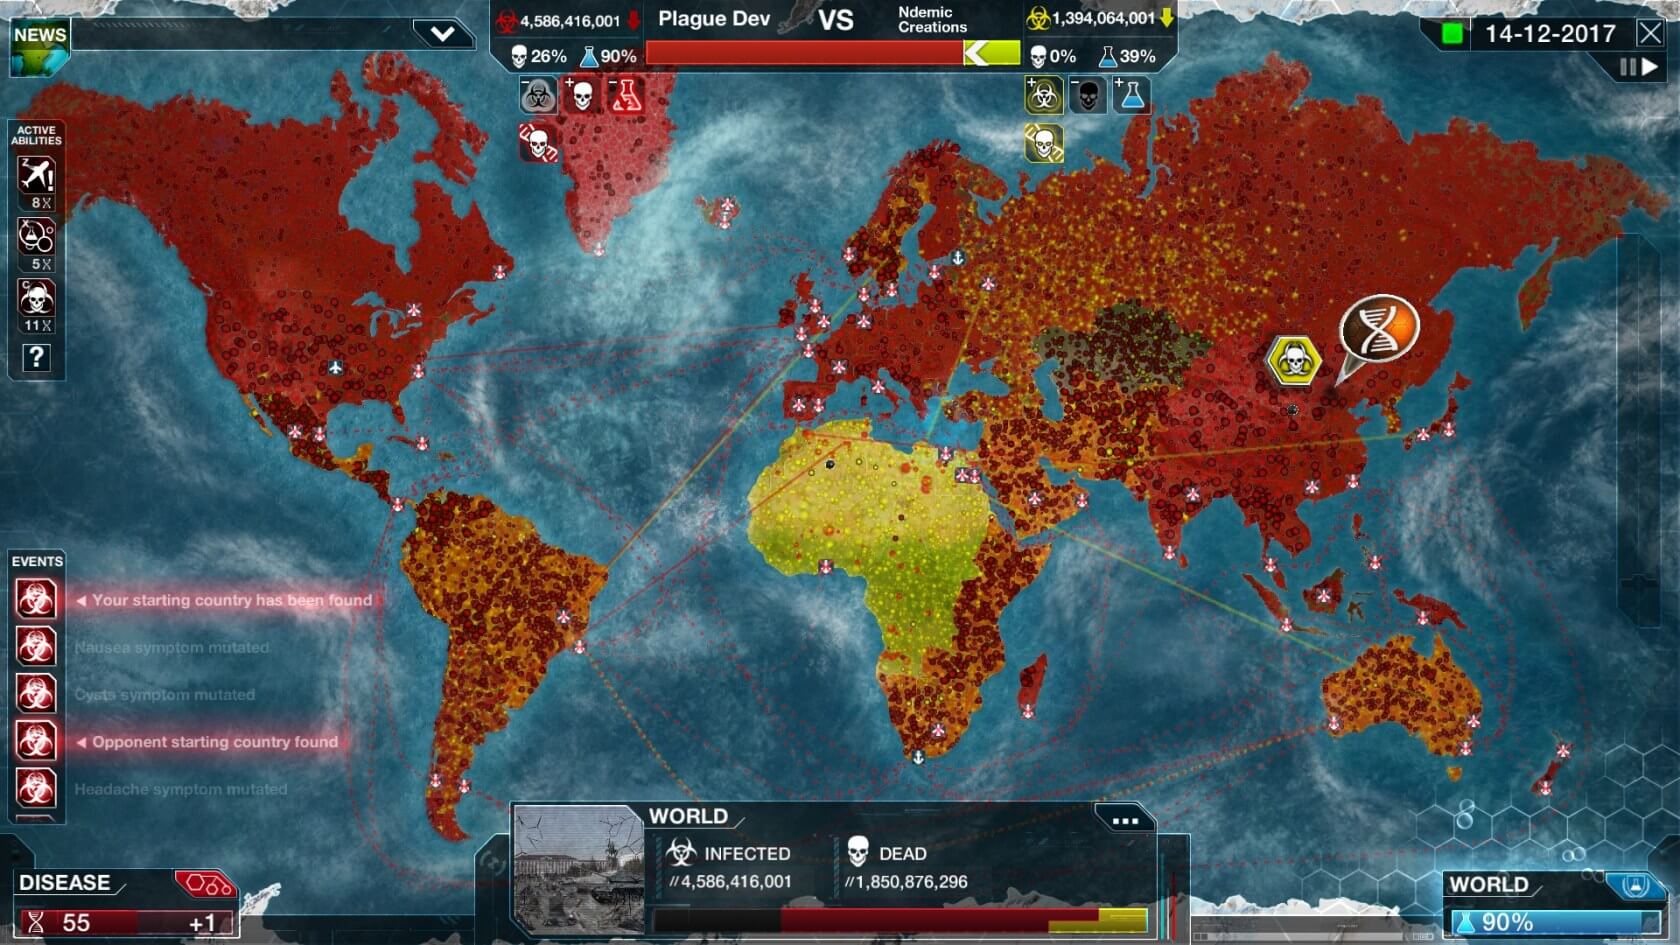 Plague Inc.'s new mode lets players save the world from a pandemic instead of destroying it